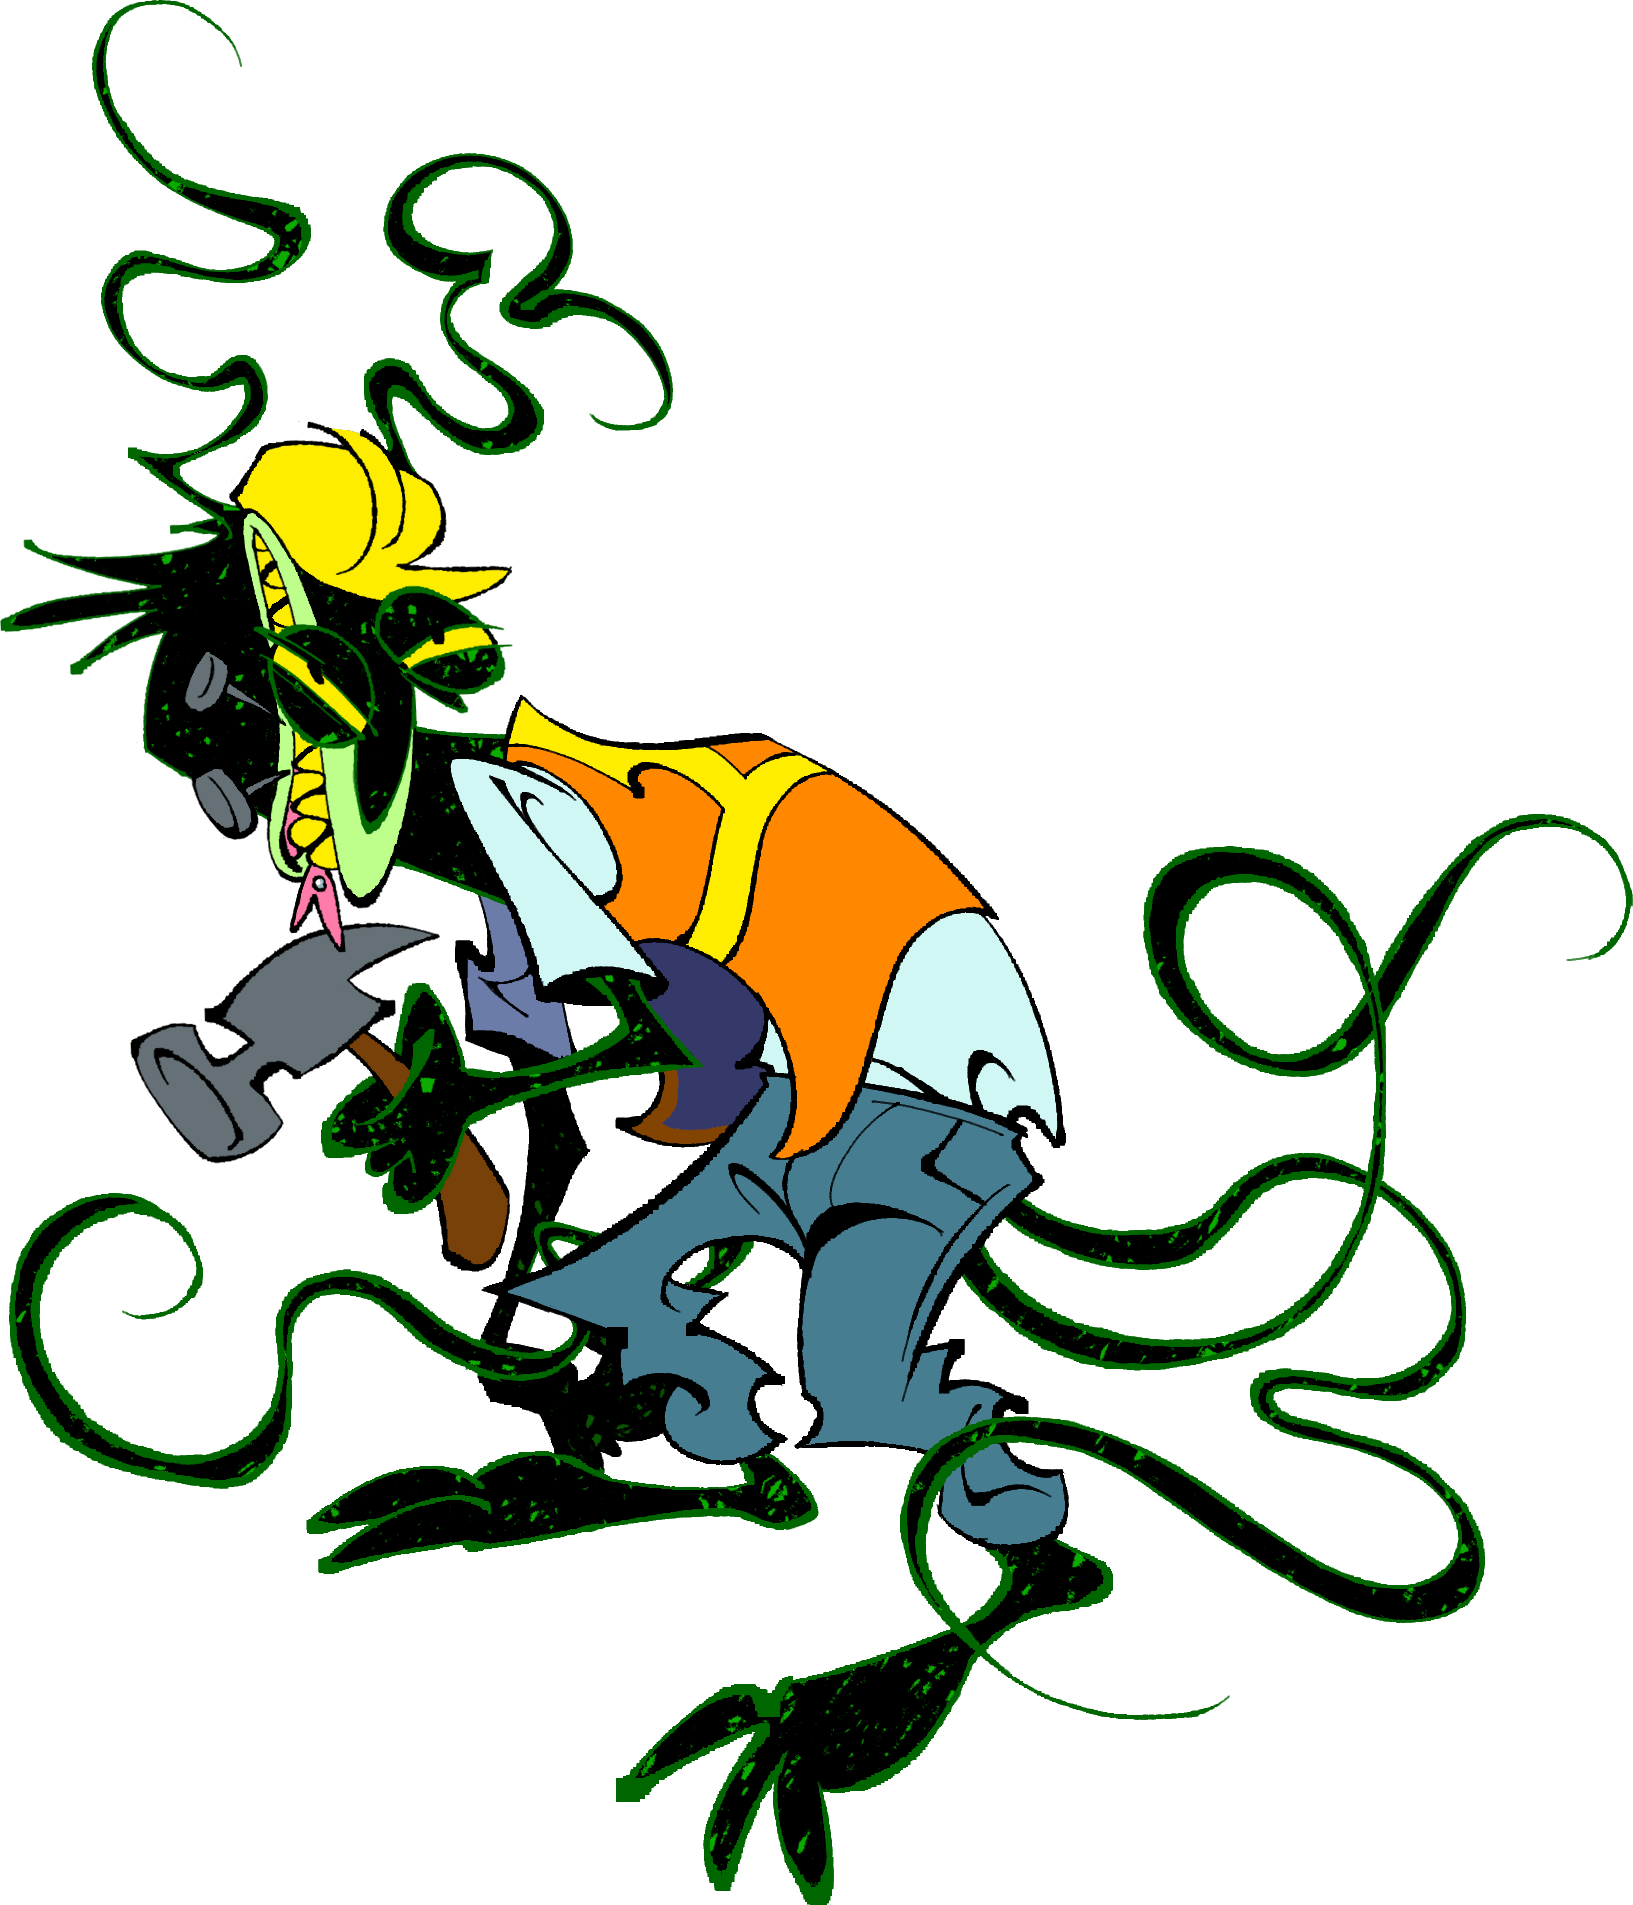 an anthropomorphic hydra dressed in a construction worker's uniform, holding a hammer and looking irritated.